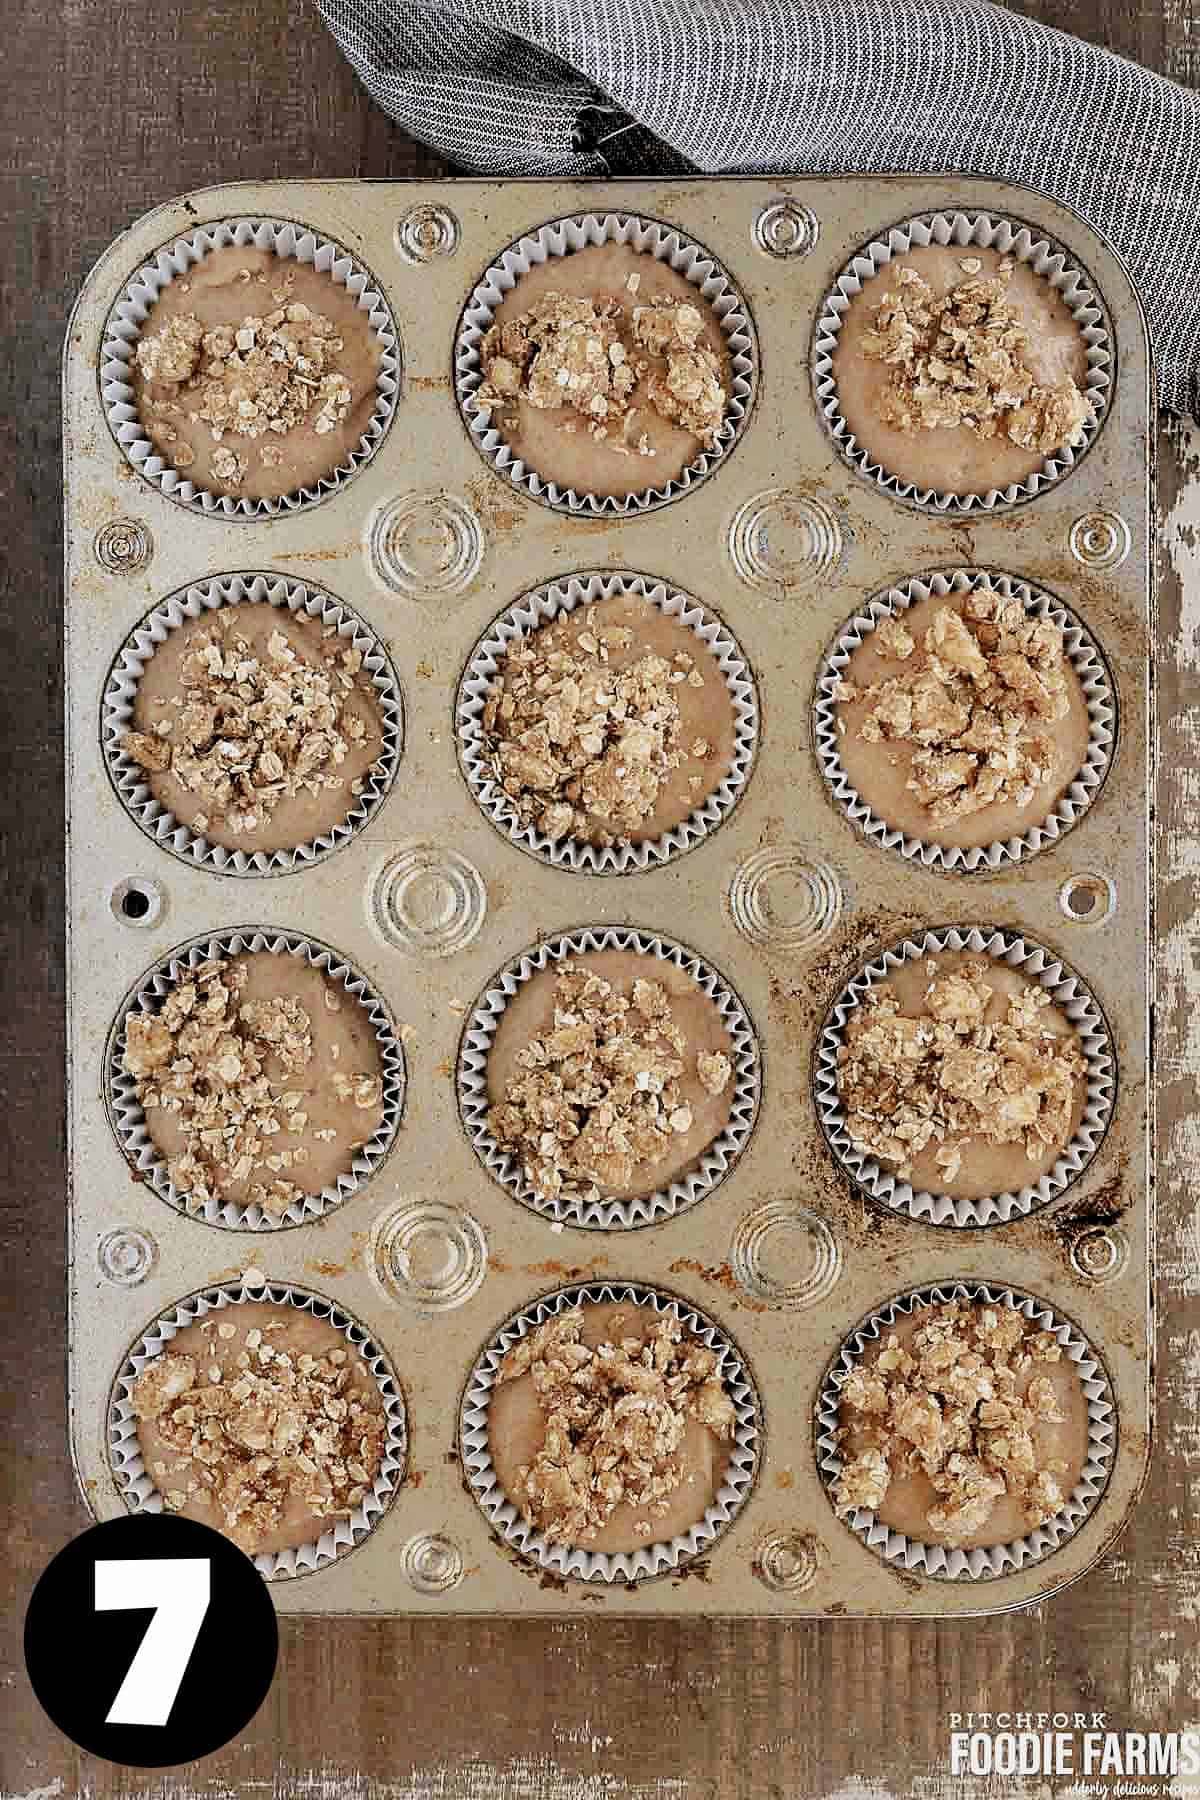 Unbaked muffins in muffin pan.